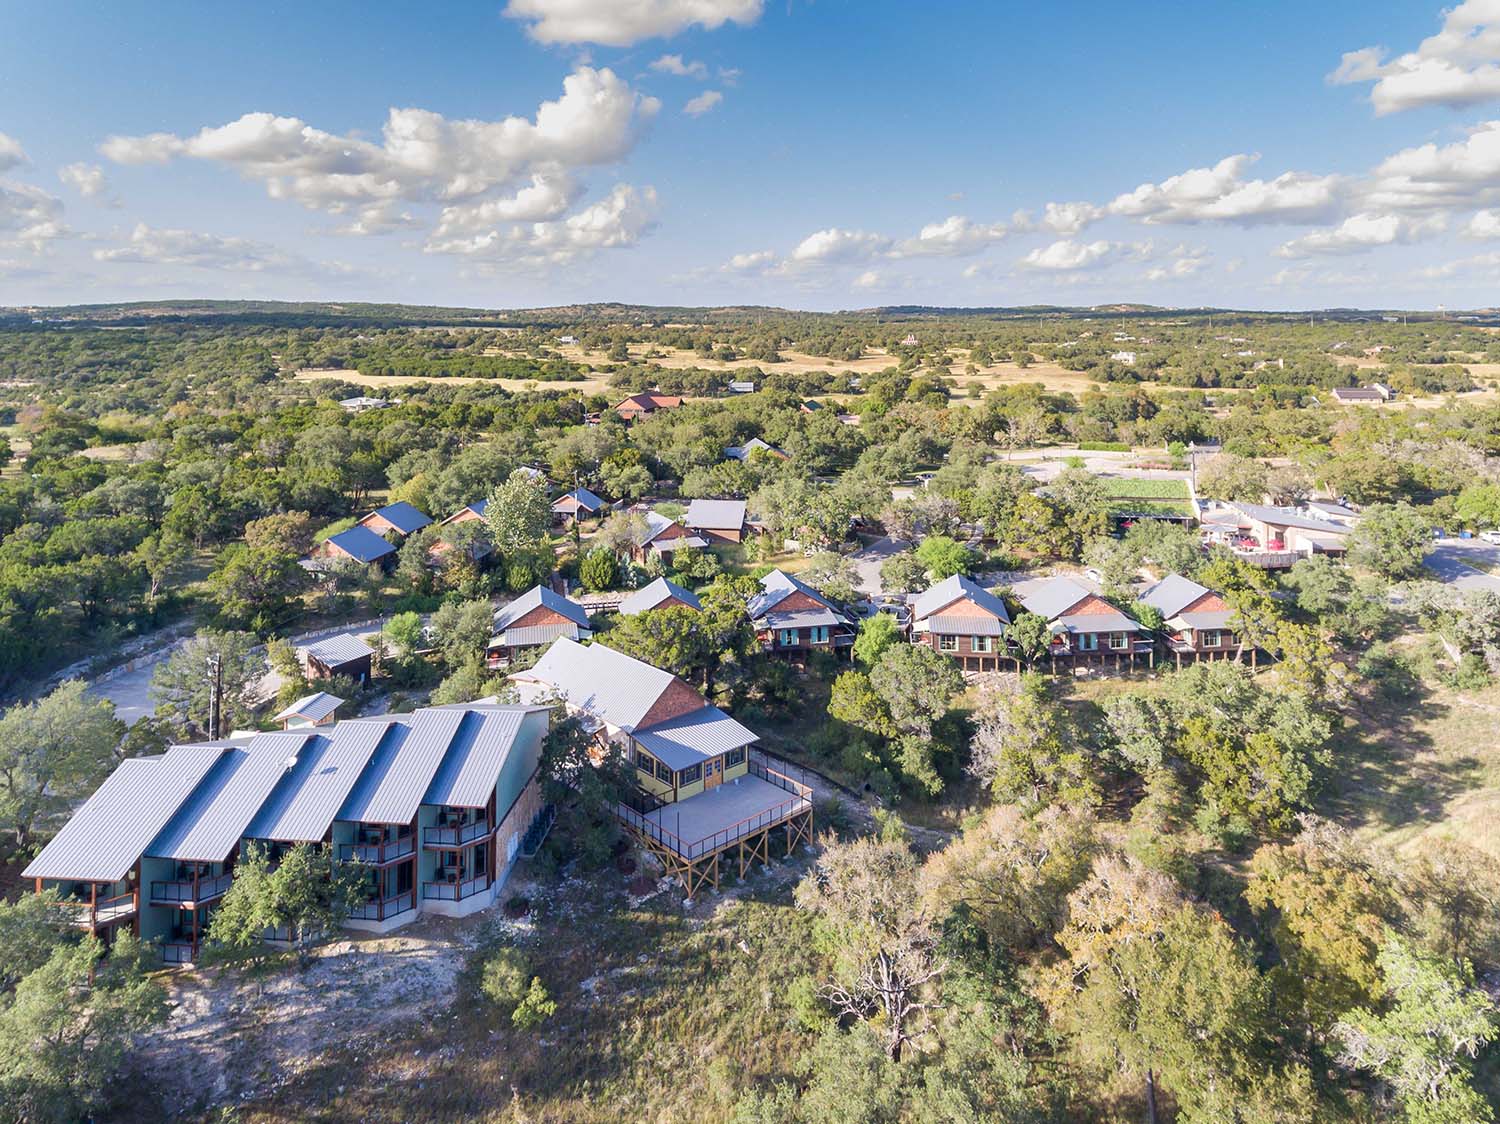 Camp Lucy Dripping Springs Texas Wine Resort